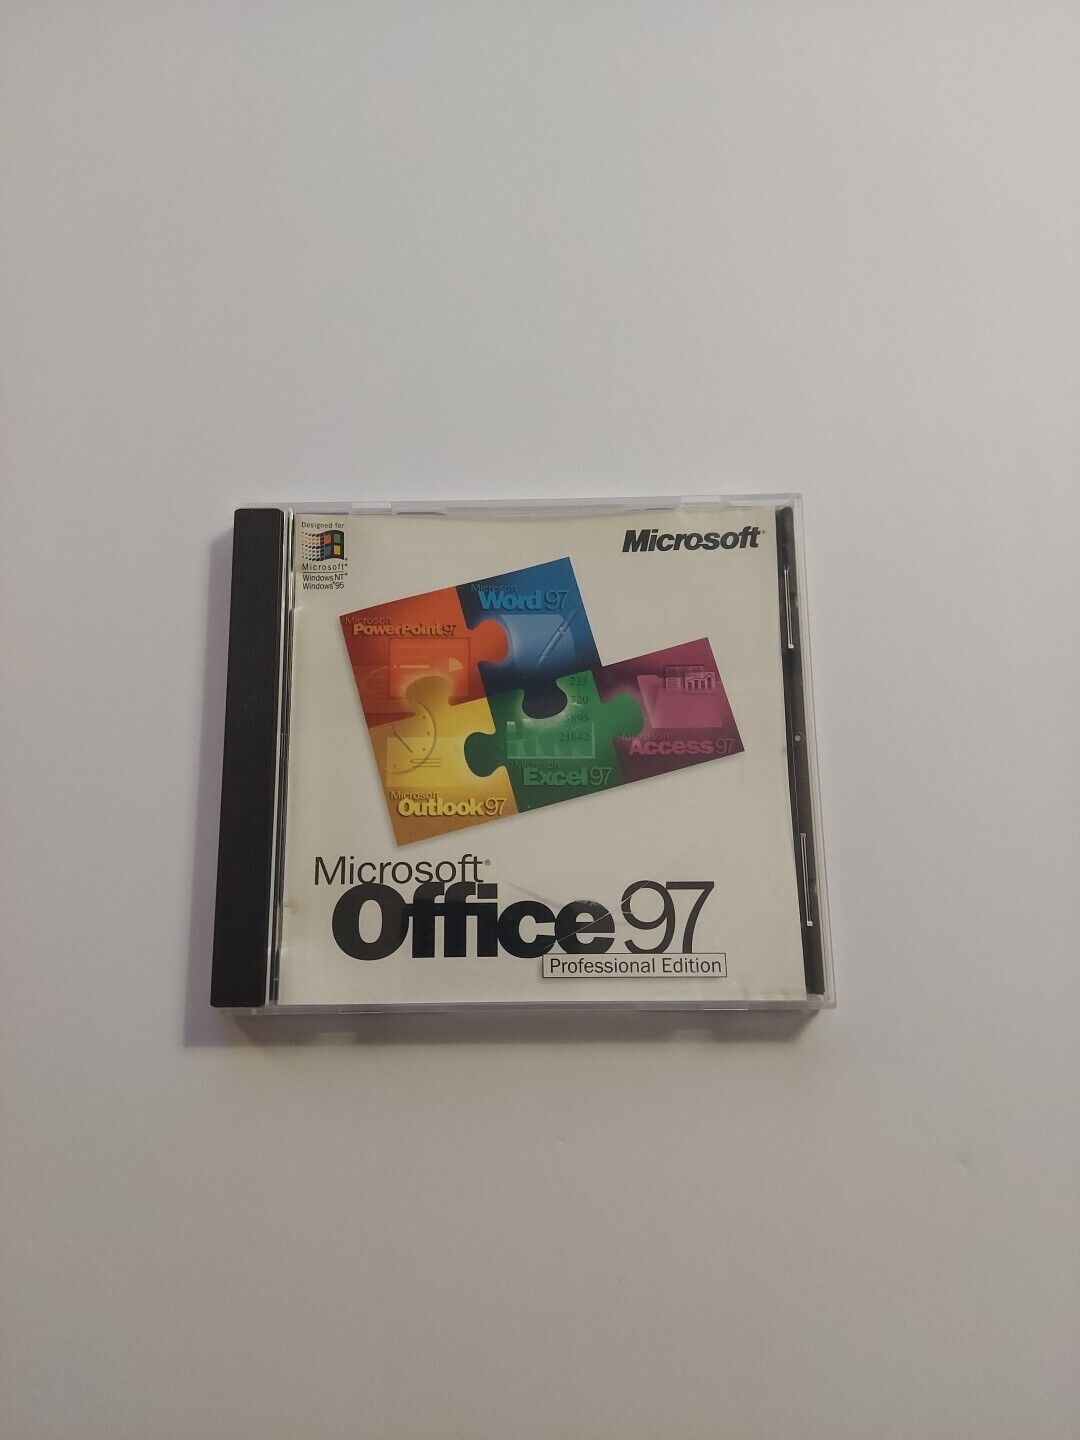 Microsoft Office 97 Professional Edition With CD Product Key